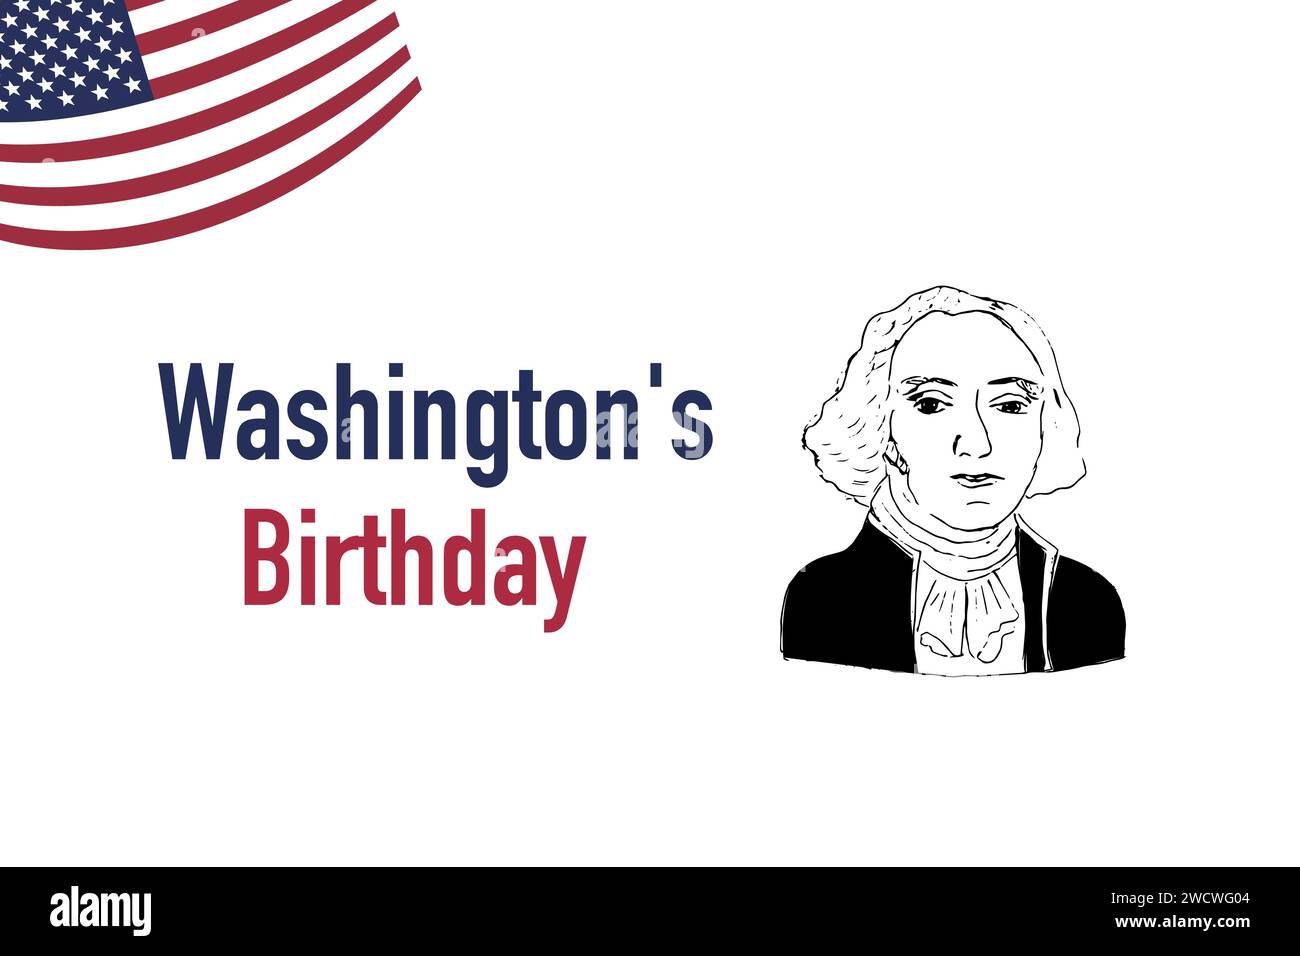 Hand drawn sketch banner of george washington silhouette. Vector illustration isolated. Minimalistic design.  Stock Vector